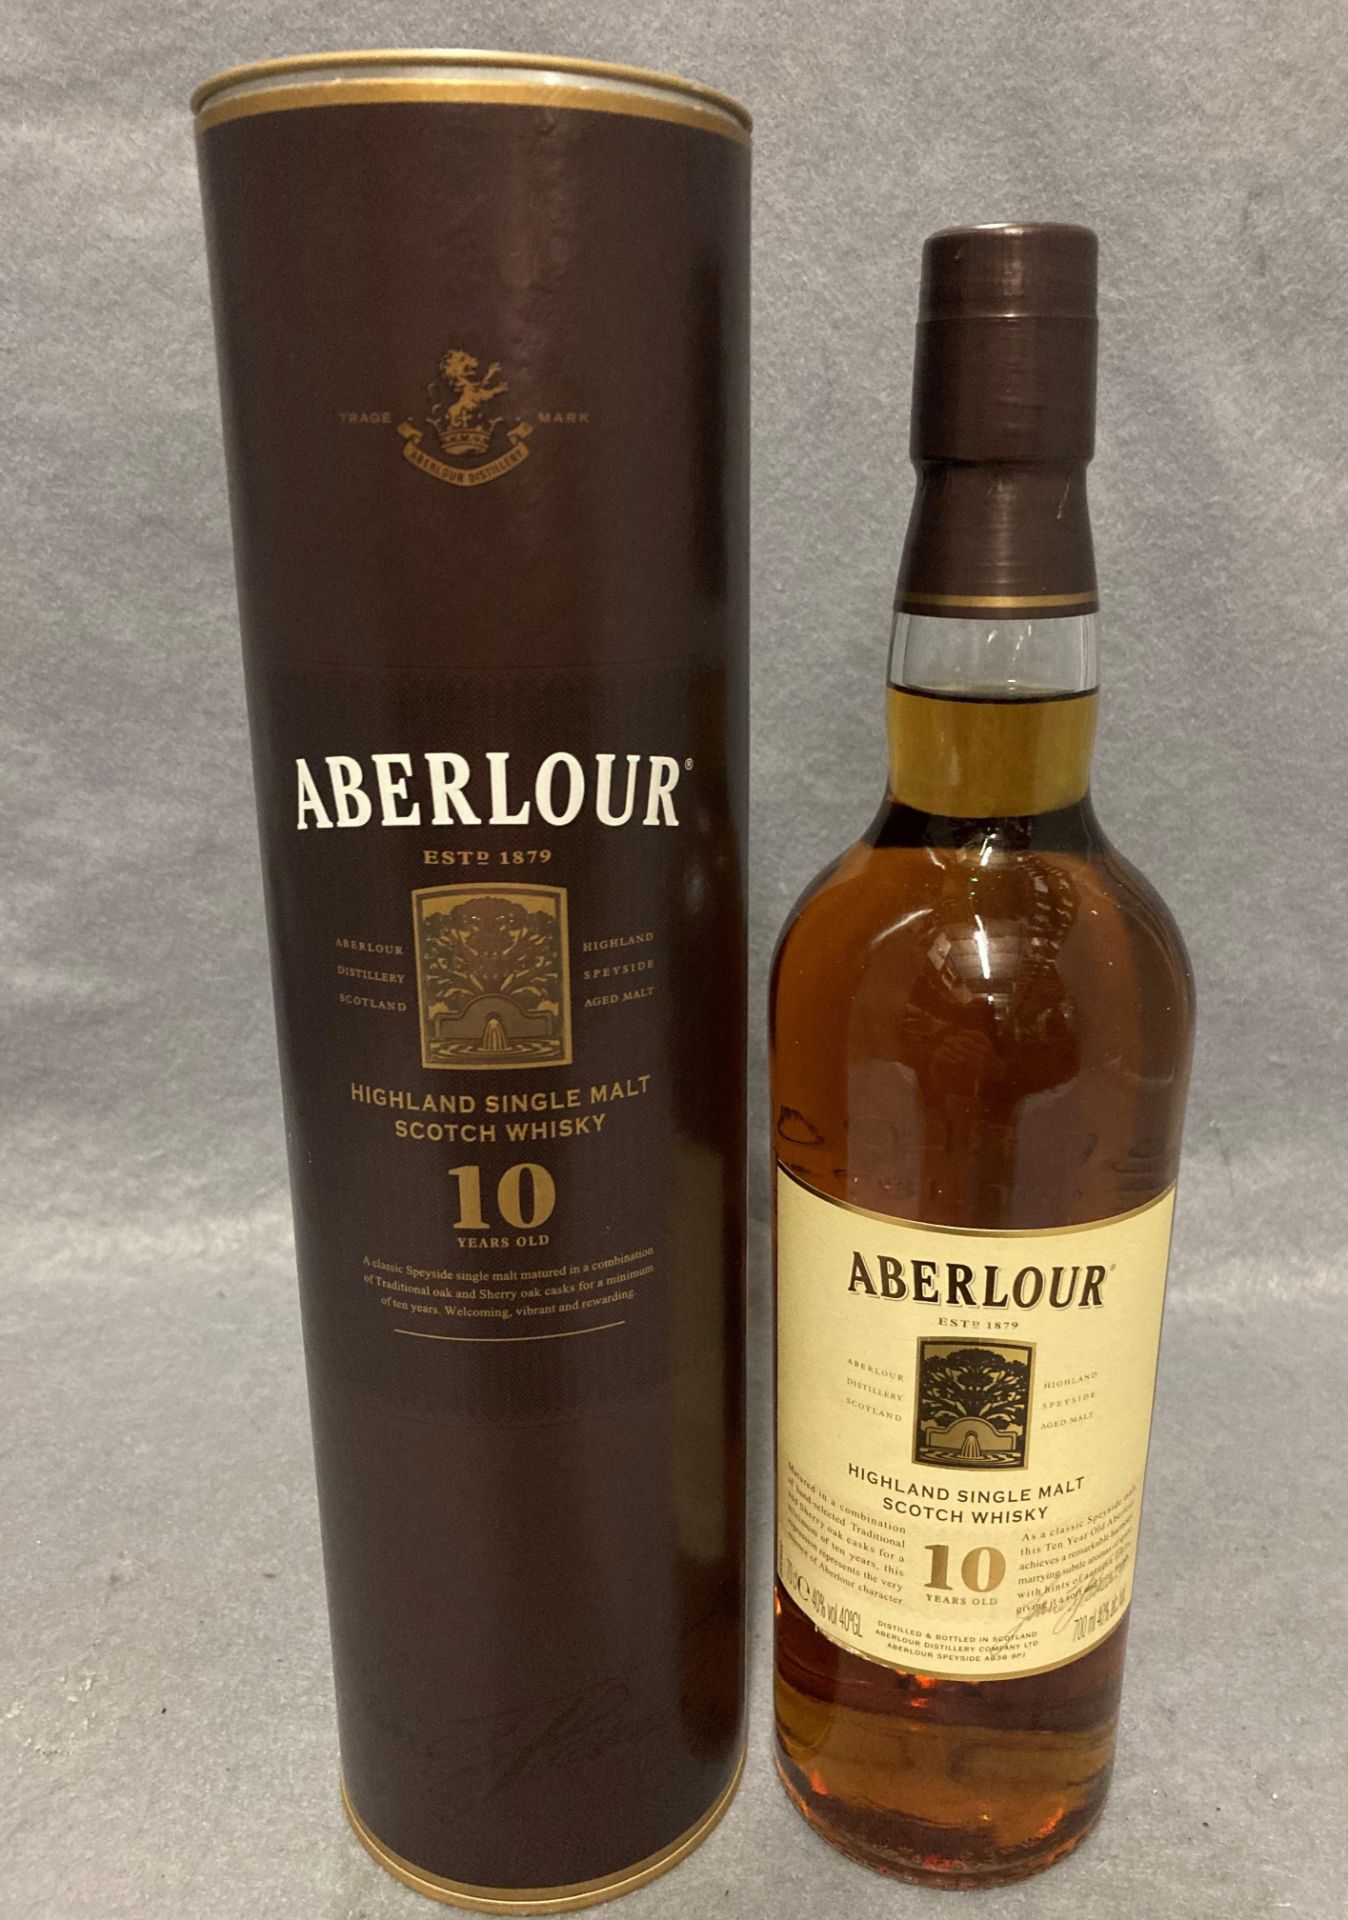 A 70cl bottle of Aberlour 10 years old Highland Single Malt Scotch Whisky (40% volume) in